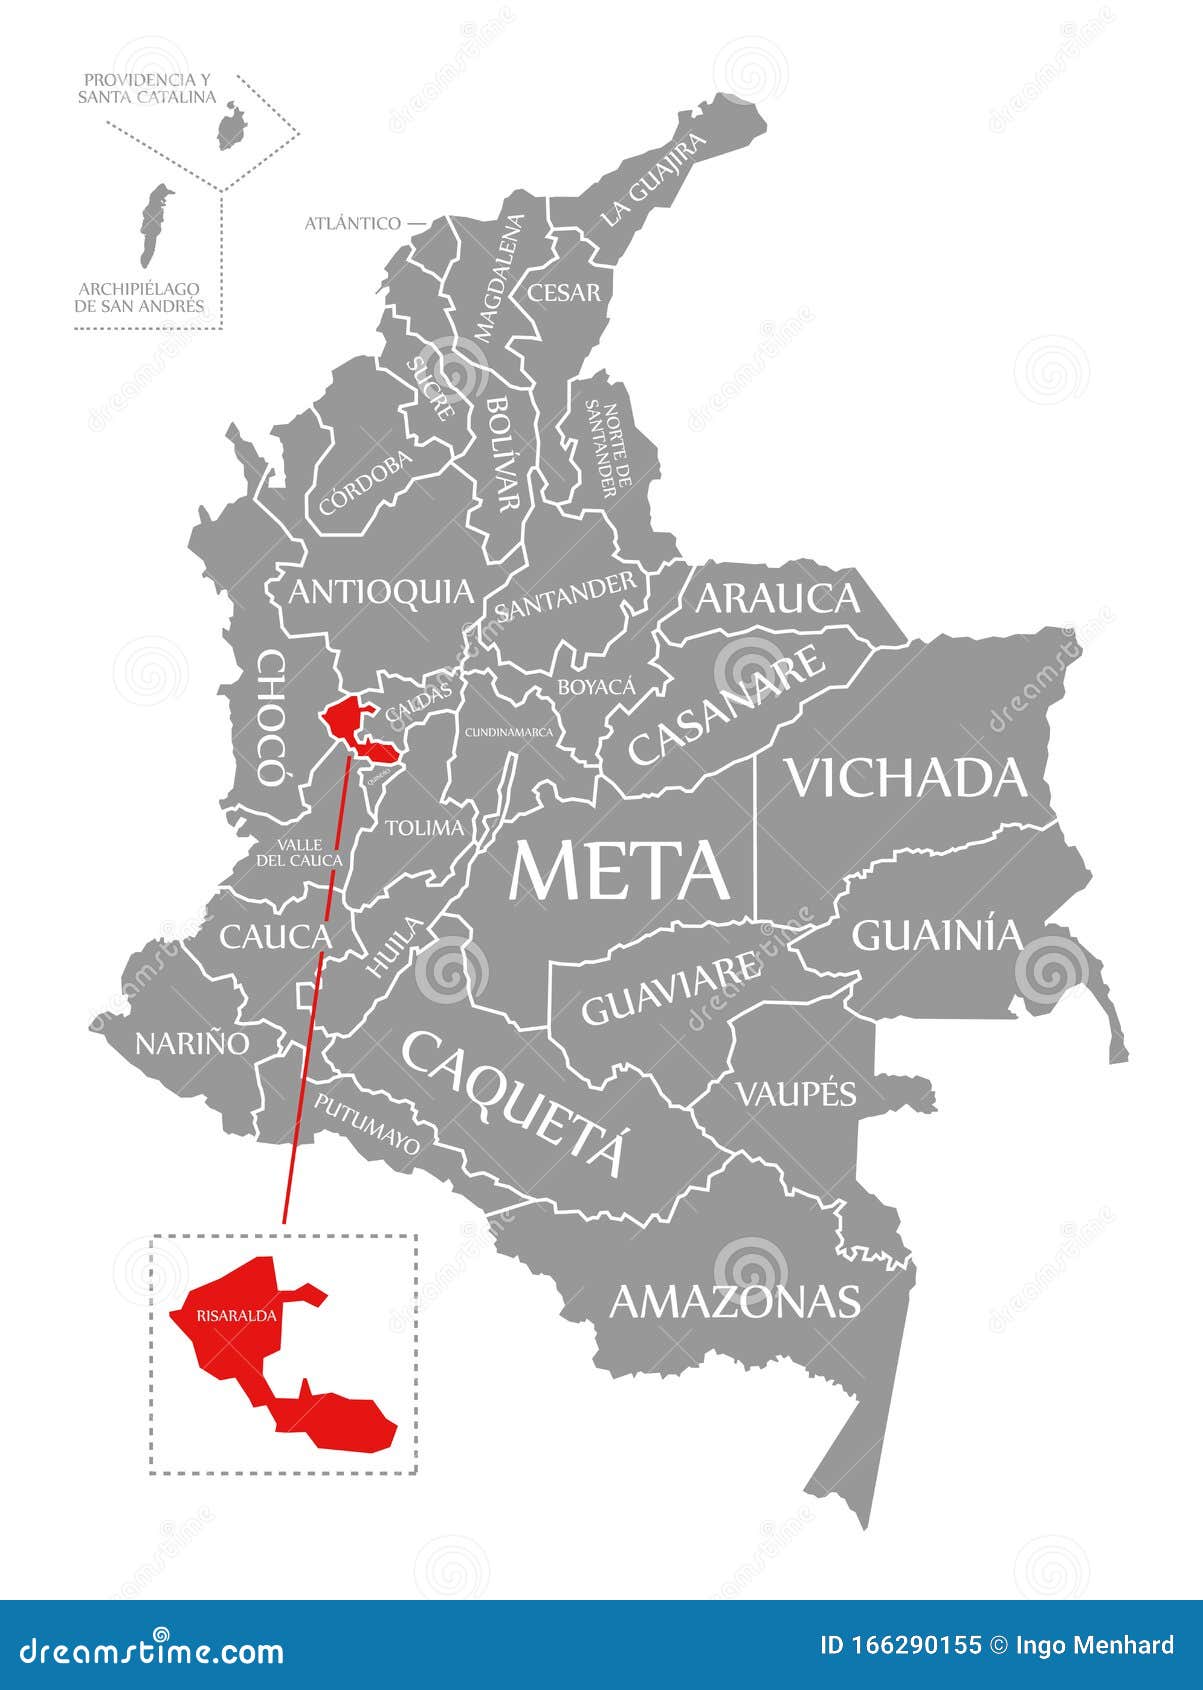 risaralda red highlighted in map of colombia